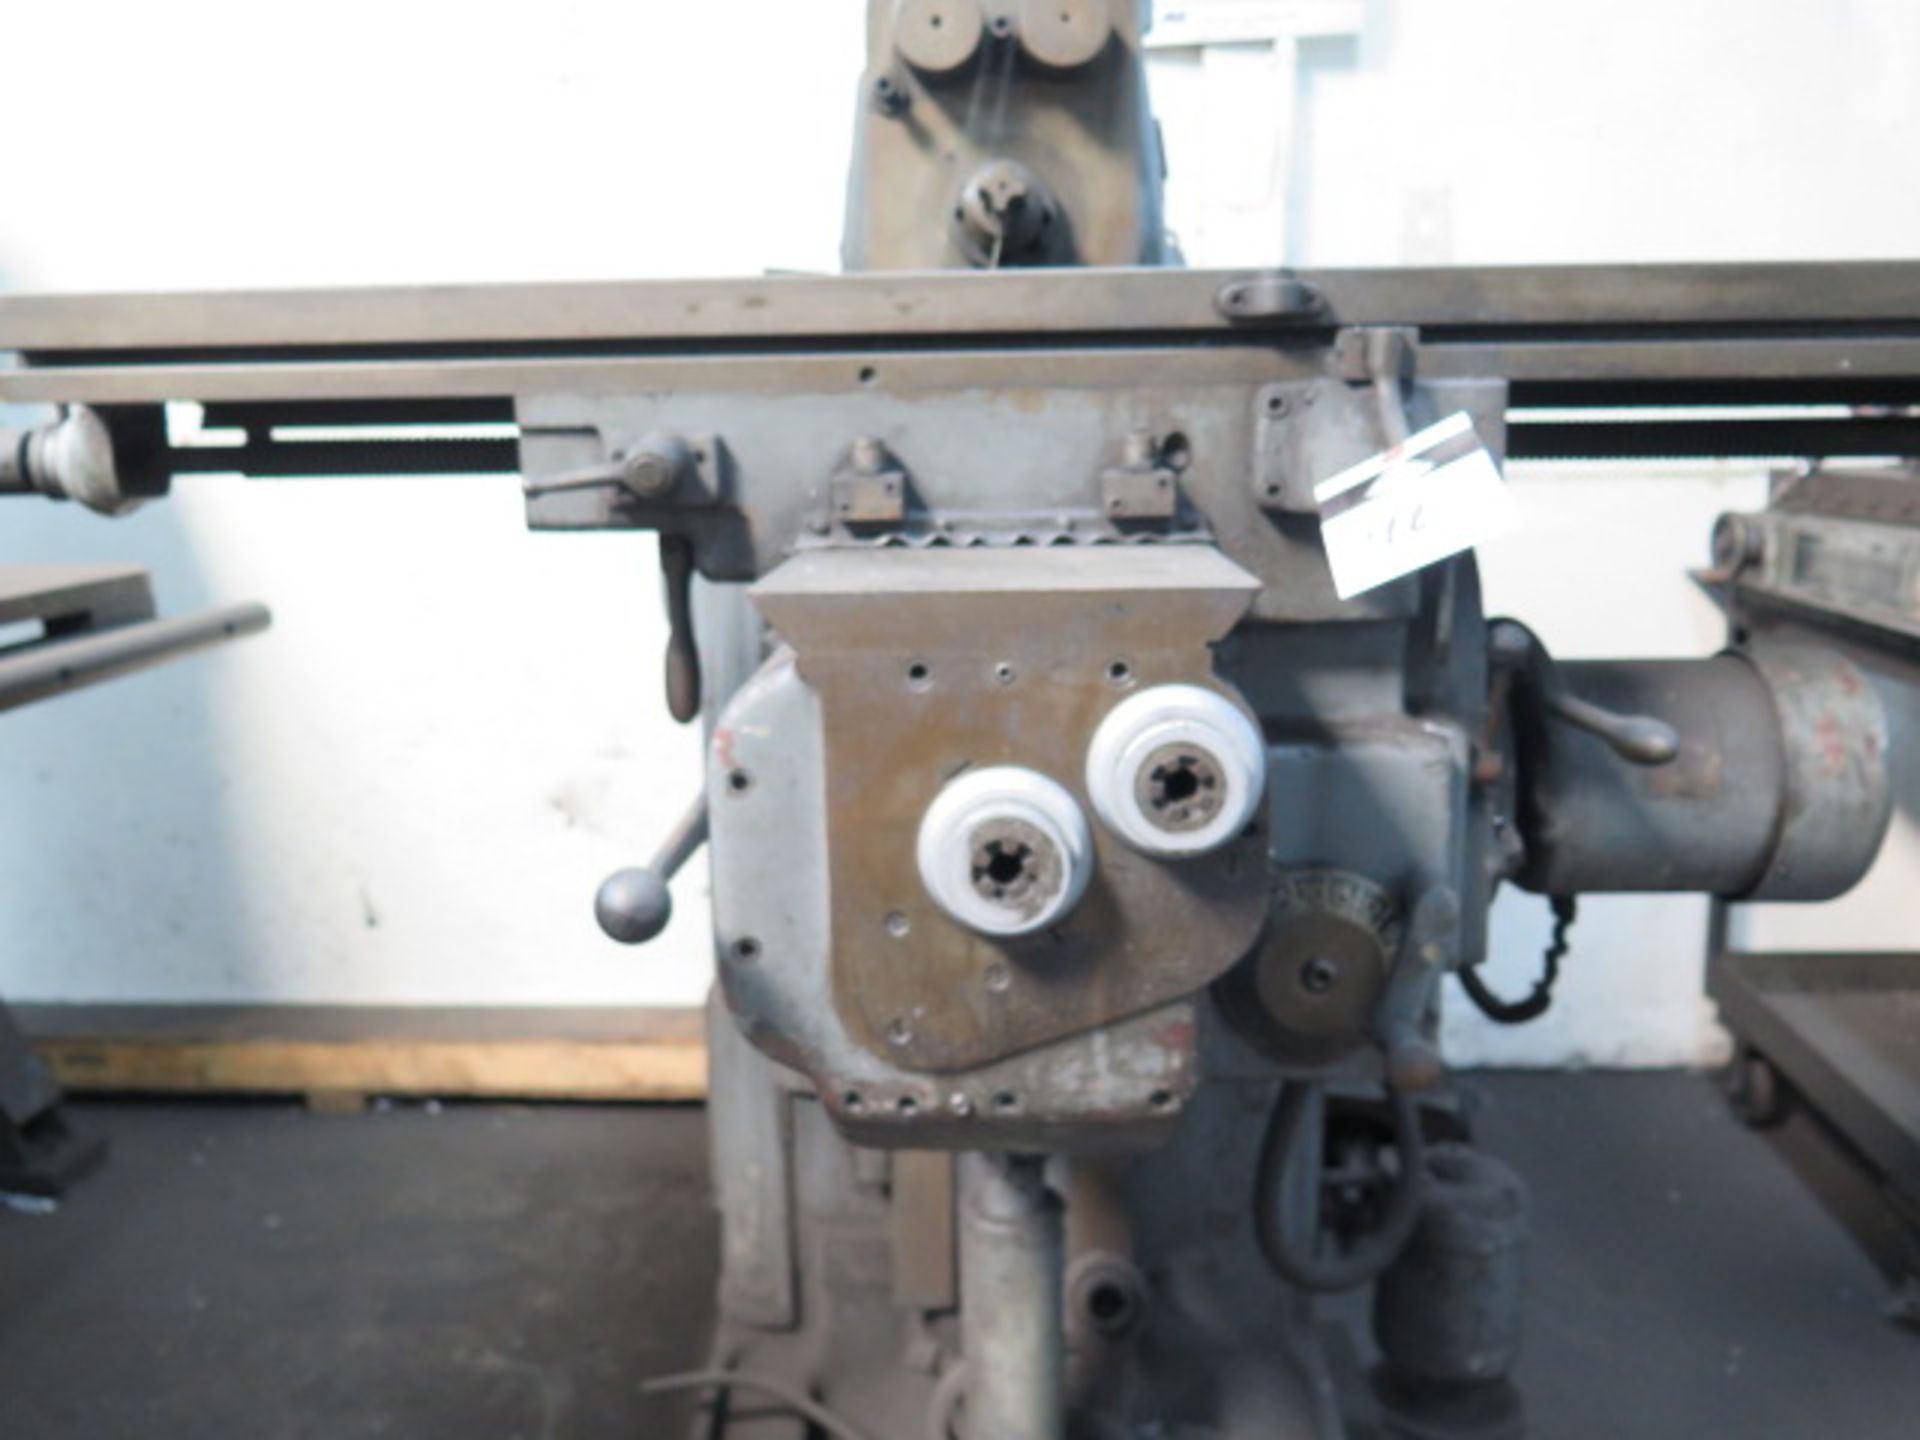 Kearney & Trecker Milwaukee 3HP-No2 mdl. CE Universal Horizontal Mill w/ 25-1300 RPM, SOLD AS IS - Image 8 of 15